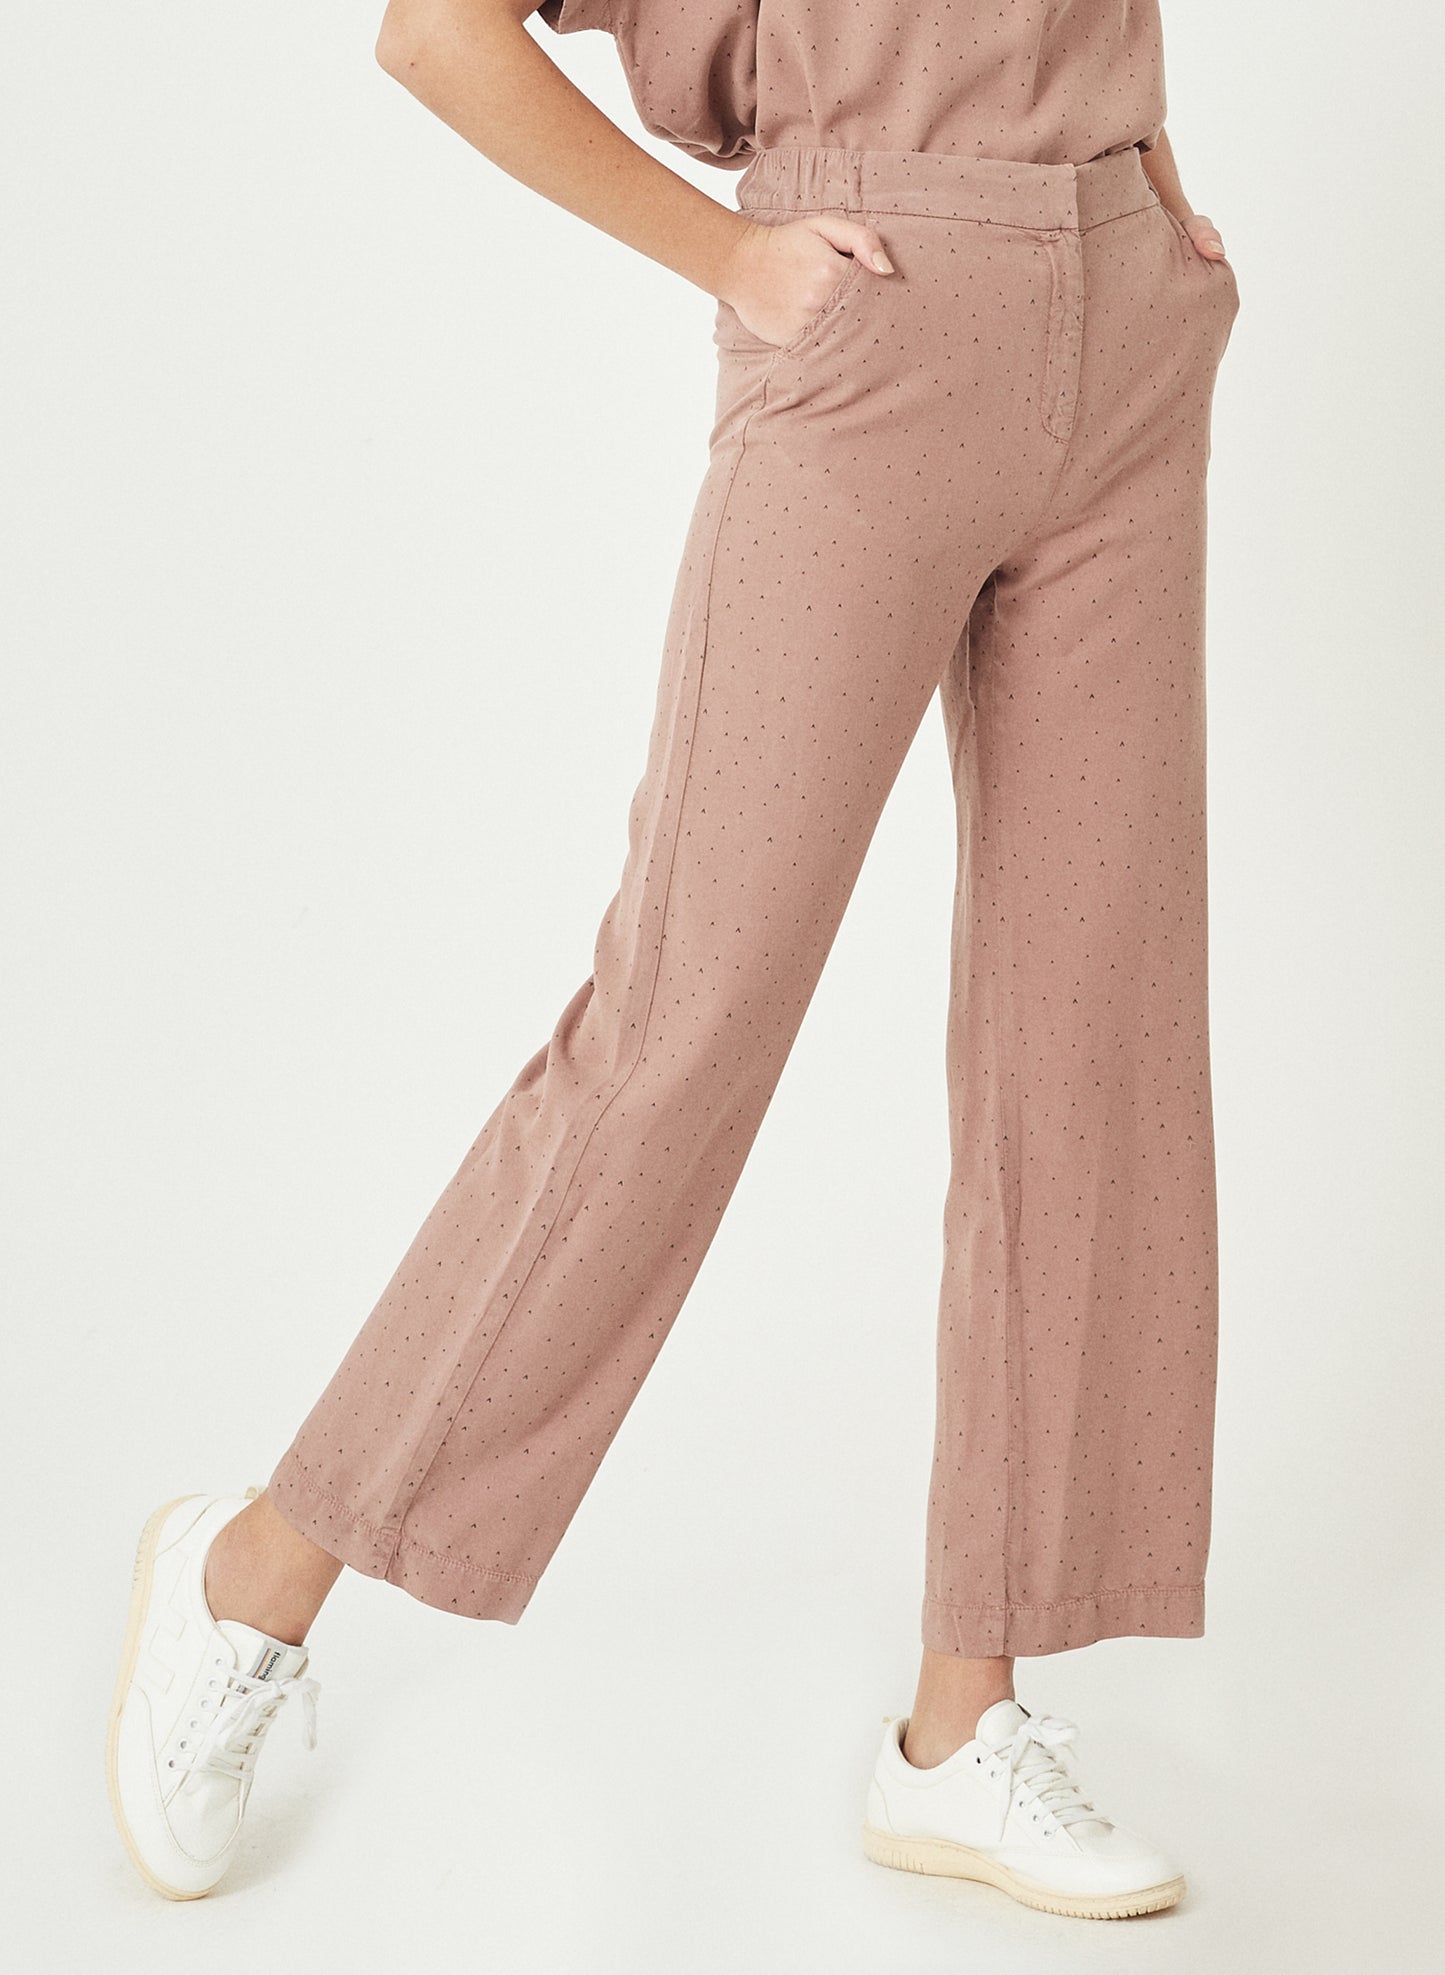 MELISSA - Allover Printed Tencel™ Culotte Pant - Dusty Rose